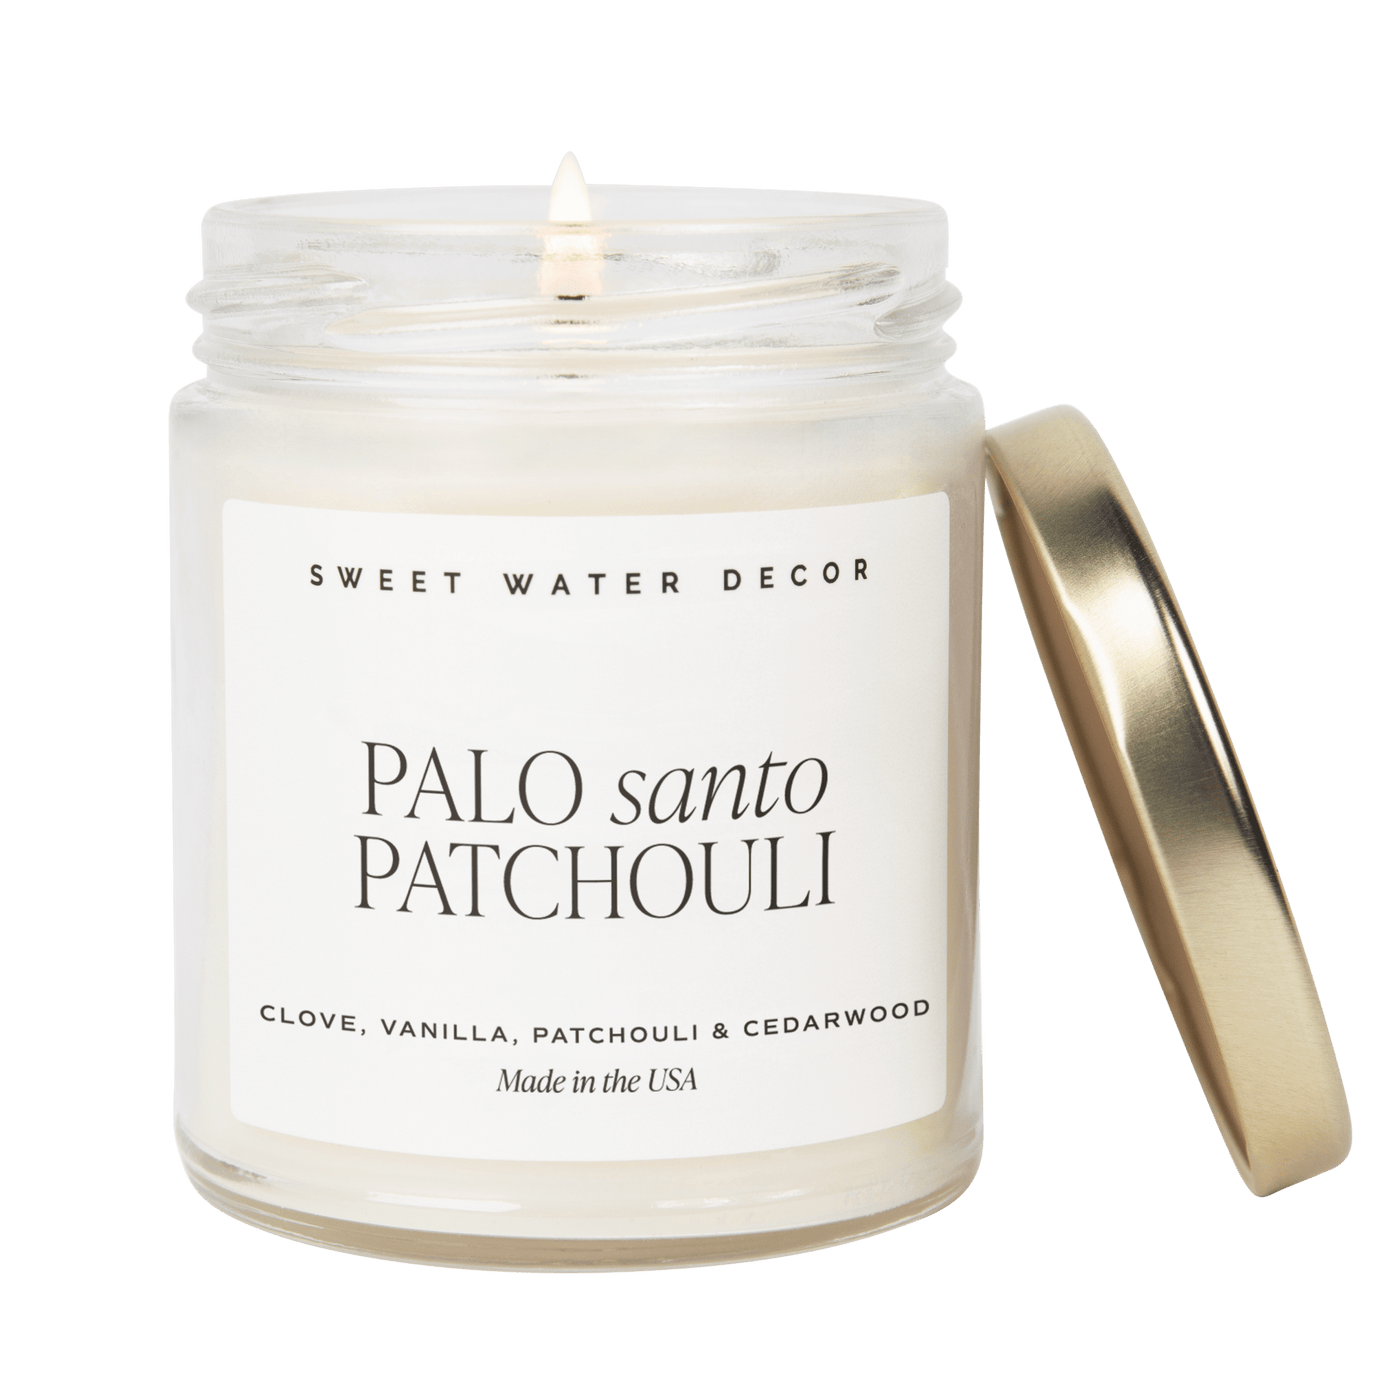 Palo Santo Patchouli Soy Candle - Clear Jar - 9 oz - Sweet Water Decor - Candles